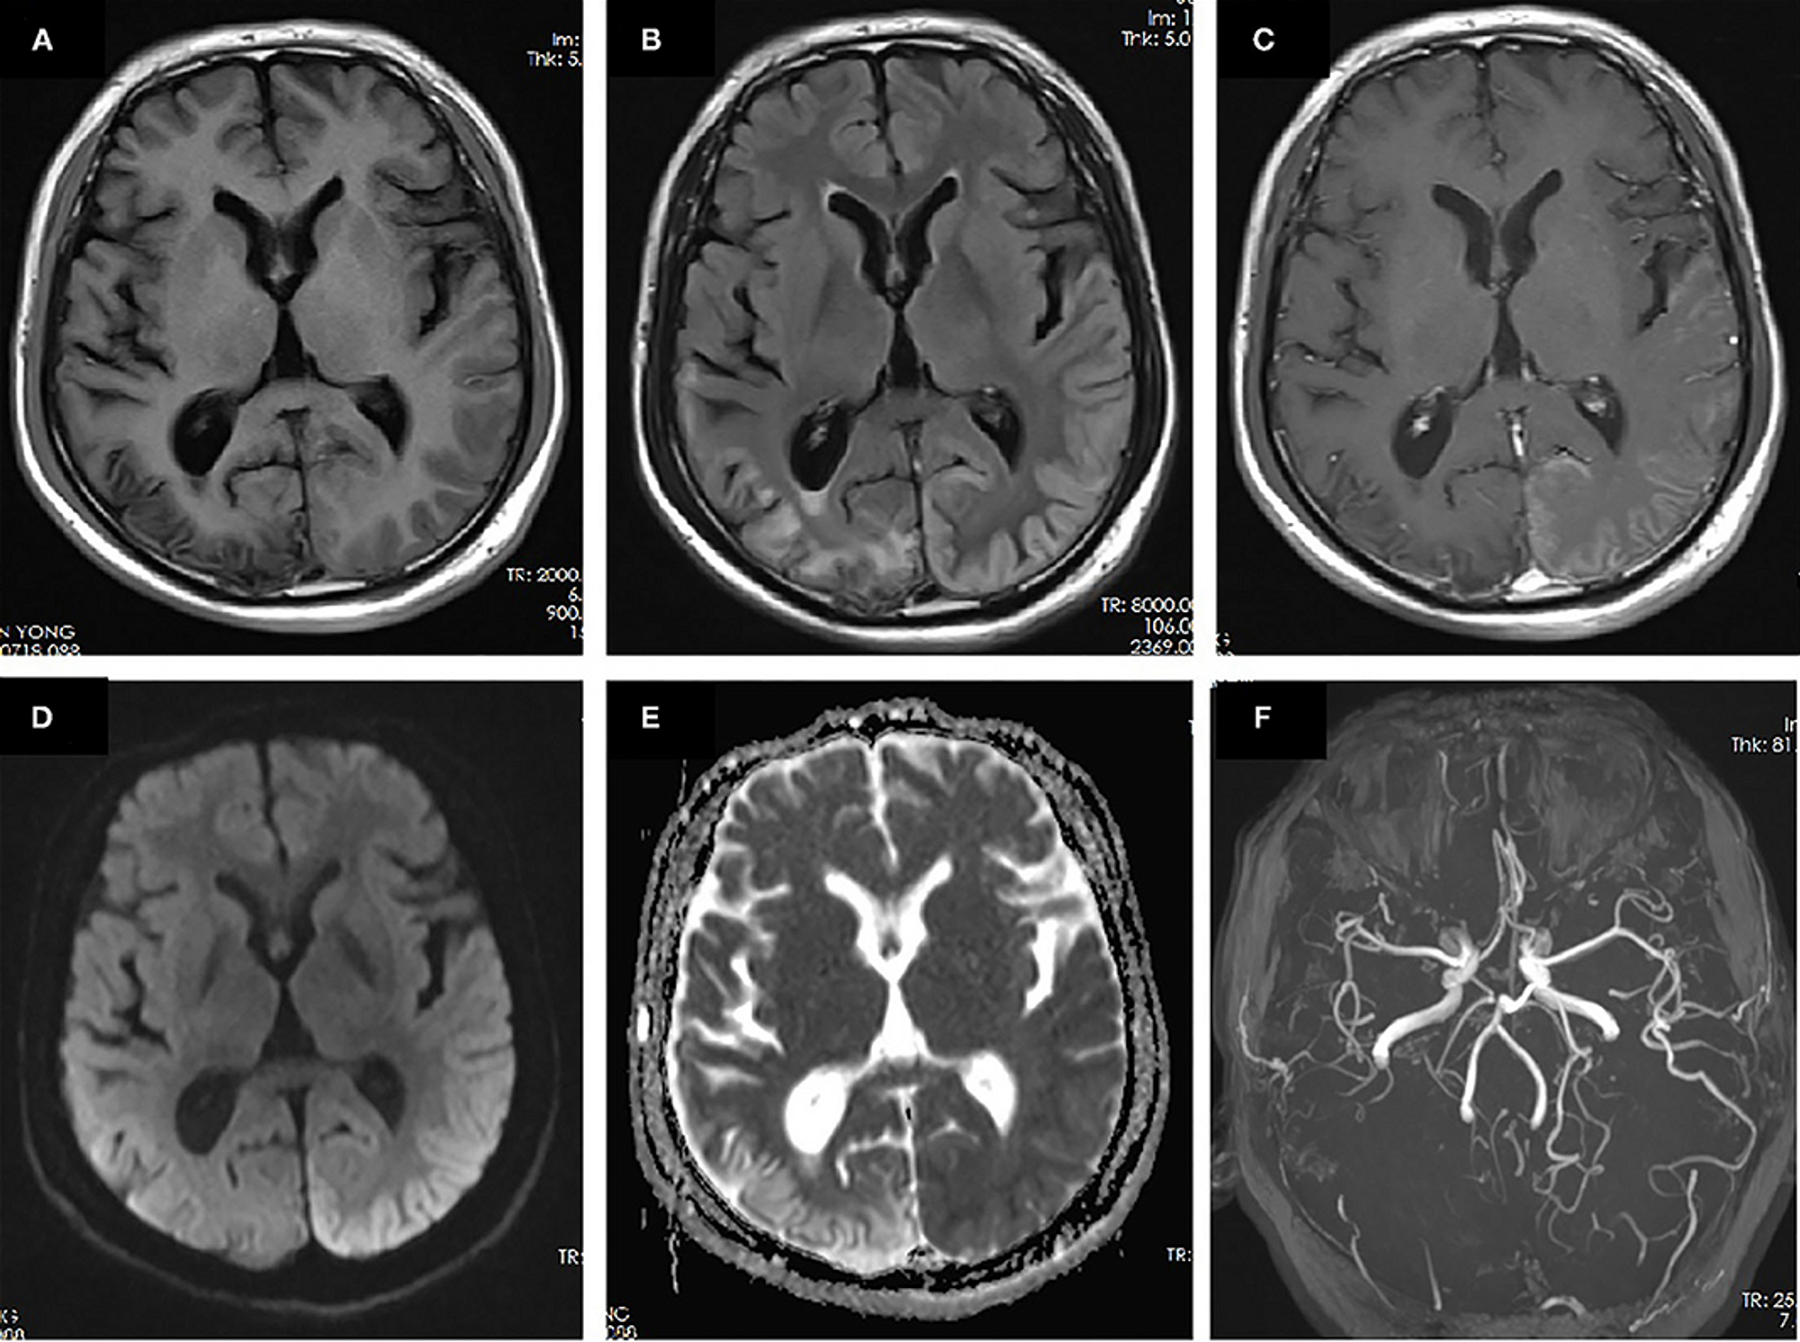 Figure 2: MRI performed 10 days after onset of the second prolonged attack. Right temporal-occipital hyperintensity on T1-weighted images (A) with gliosis on T2-FLAIR images (B) suggests the chronic stage of cortical necrosis caused by first prolonged attack. Left temporal–occipital cortex hyperintensity on T2-FLAIR images (B) with gyriform enhancement (C), restricted diffusion (D), and normal apparent diffusion coefficient (ADC) (E) suggests the subacute stage of cortical necrosis caused by second prolonged attack. MRA demonstrated vasodilation of the branches of the left middle cerebral artery (MCA) and posterior cerebral artery (PCA) (F). 